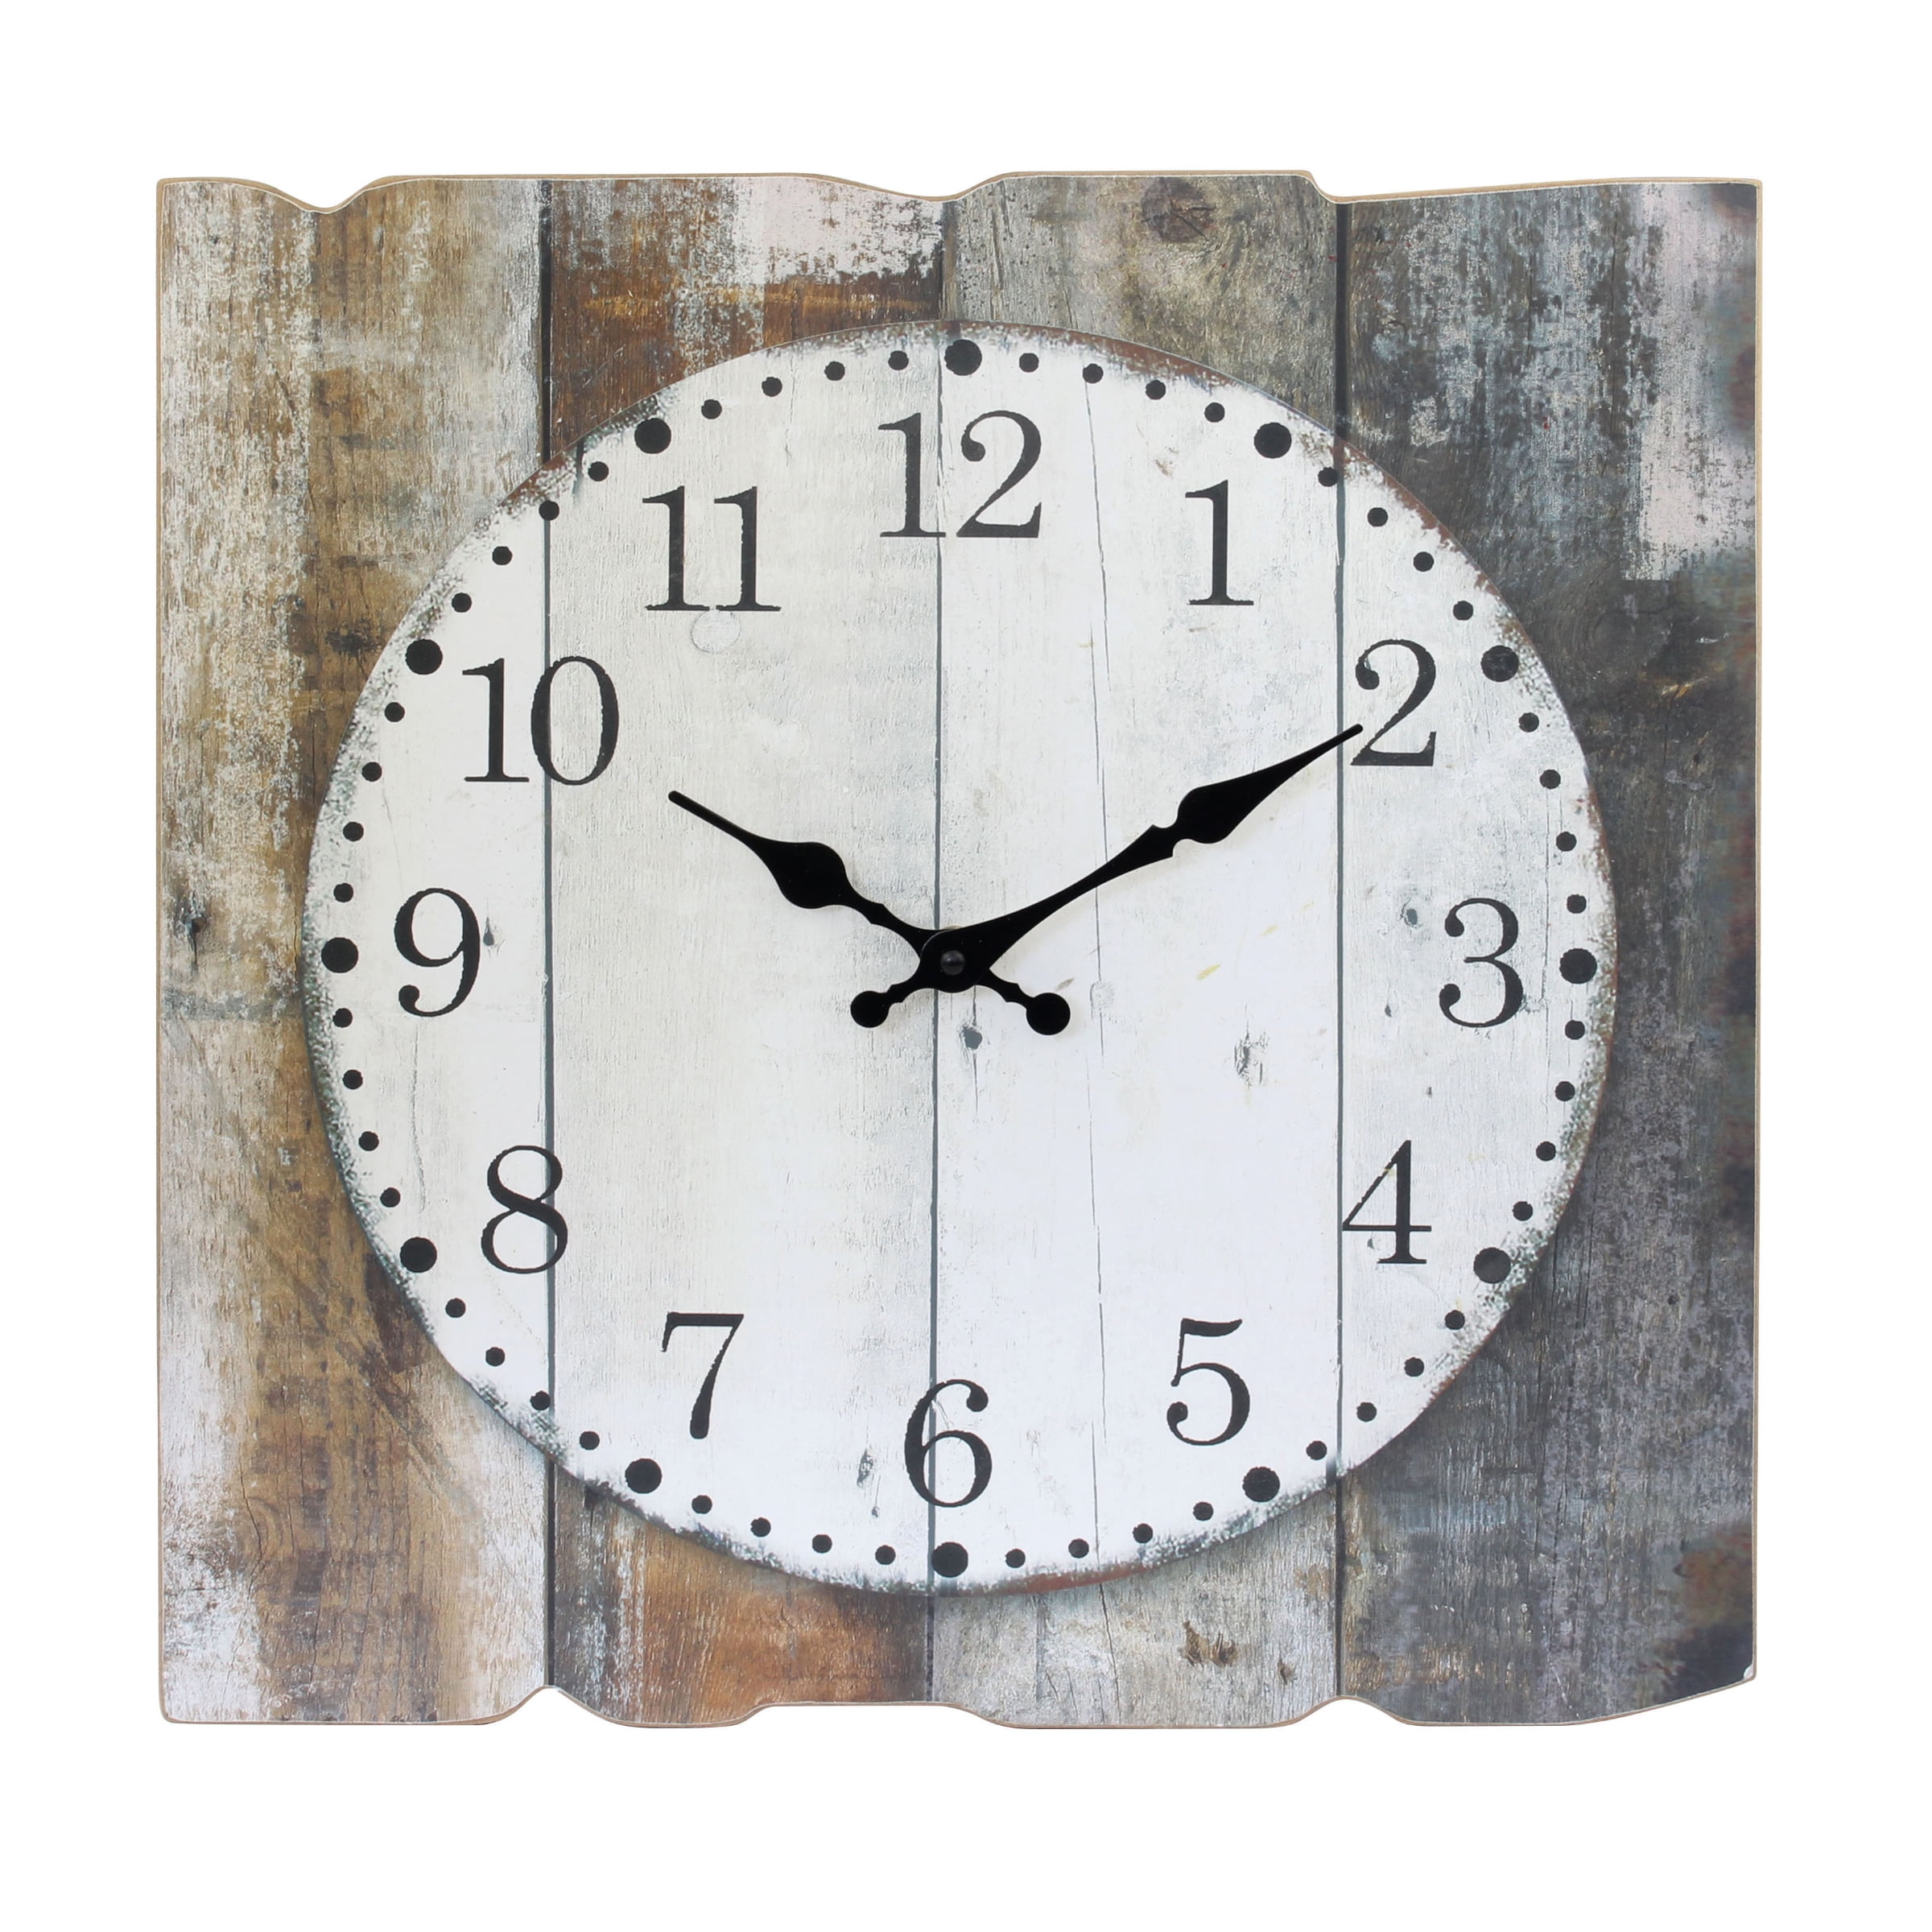 Home Sweet Farmhouse Wall Clock Home Sweet Quote Rustic Farmhouse Country Design Wooden Round Clock Wall Decor for Home Office School 12 Inch Battery Operated Gift Wall Hanging Clock